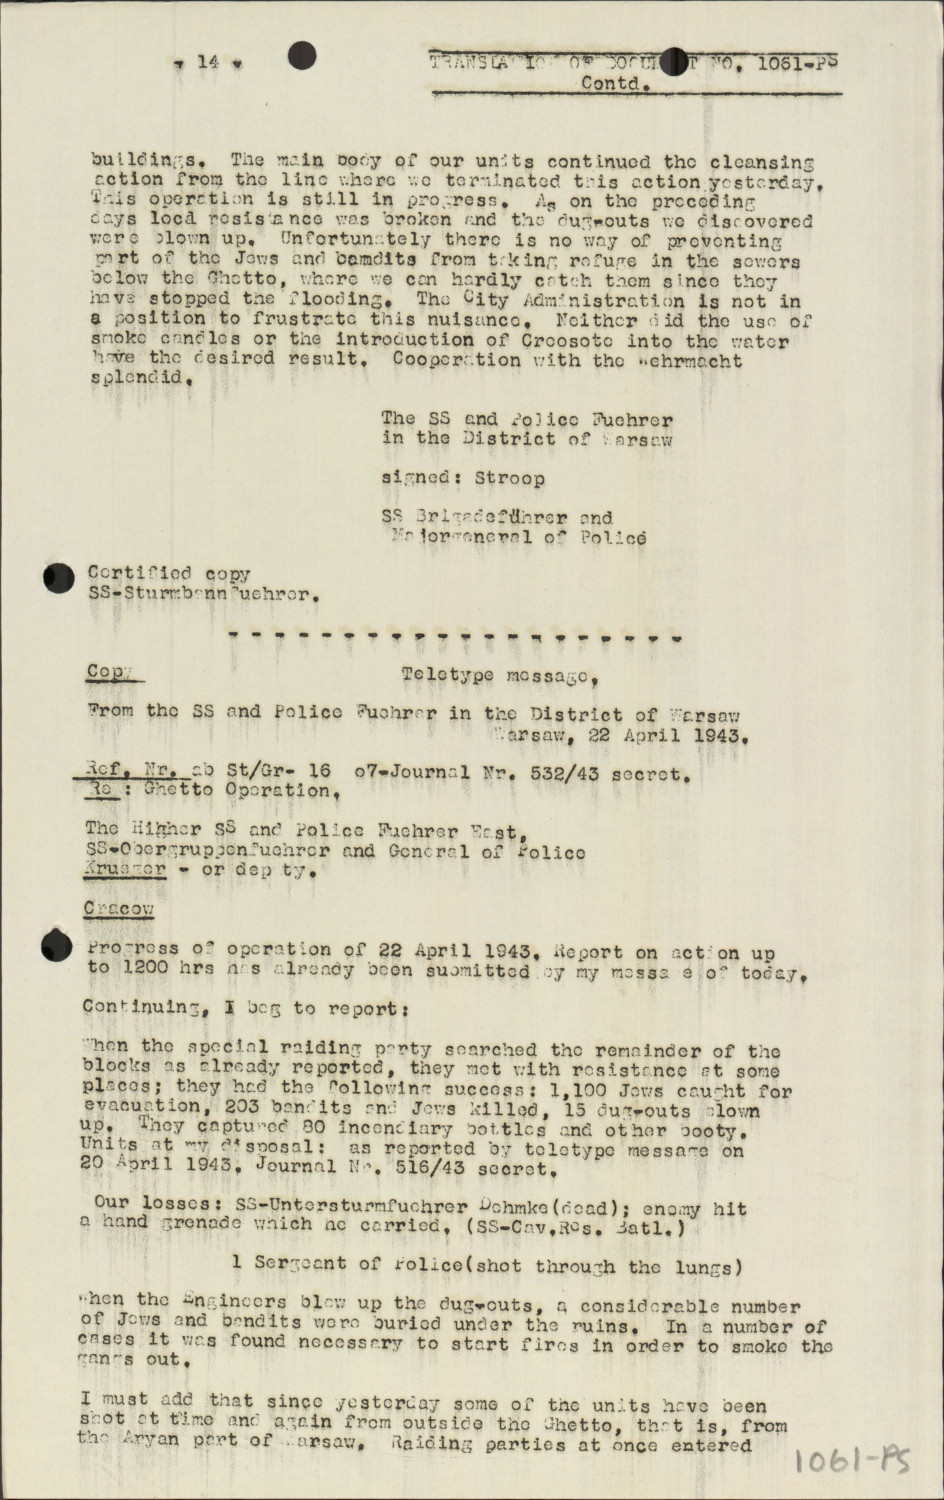 Scanned document page 14